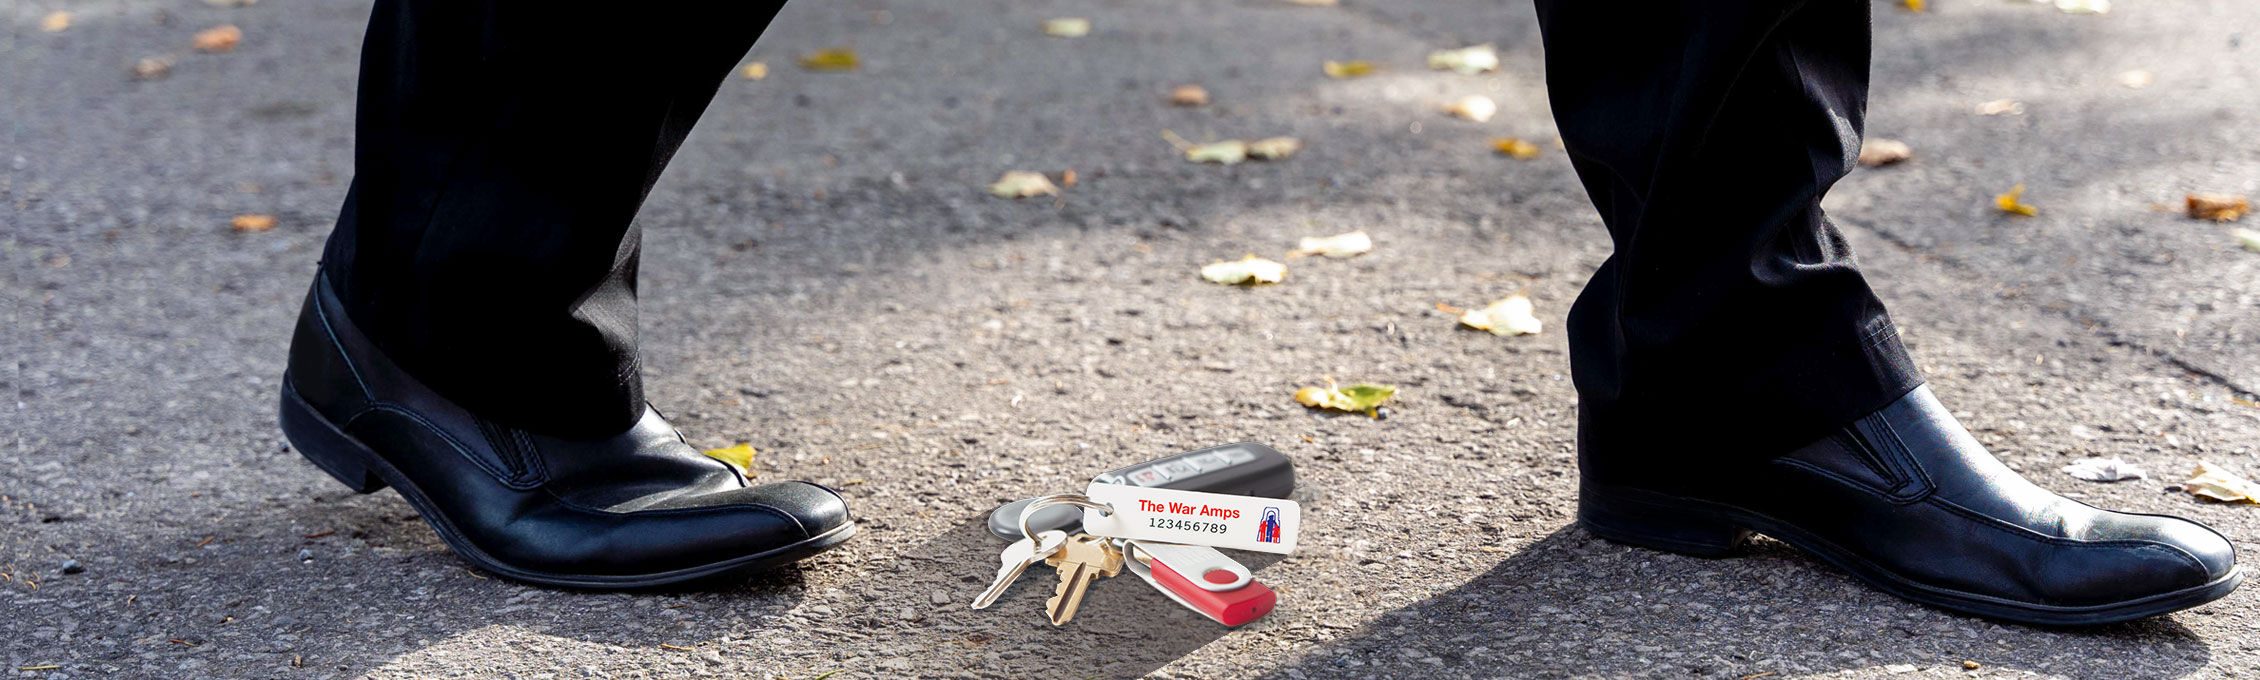 A set of keys with a War Amps key tag attached laying on the ground. Learn more about the Key Tag Service.